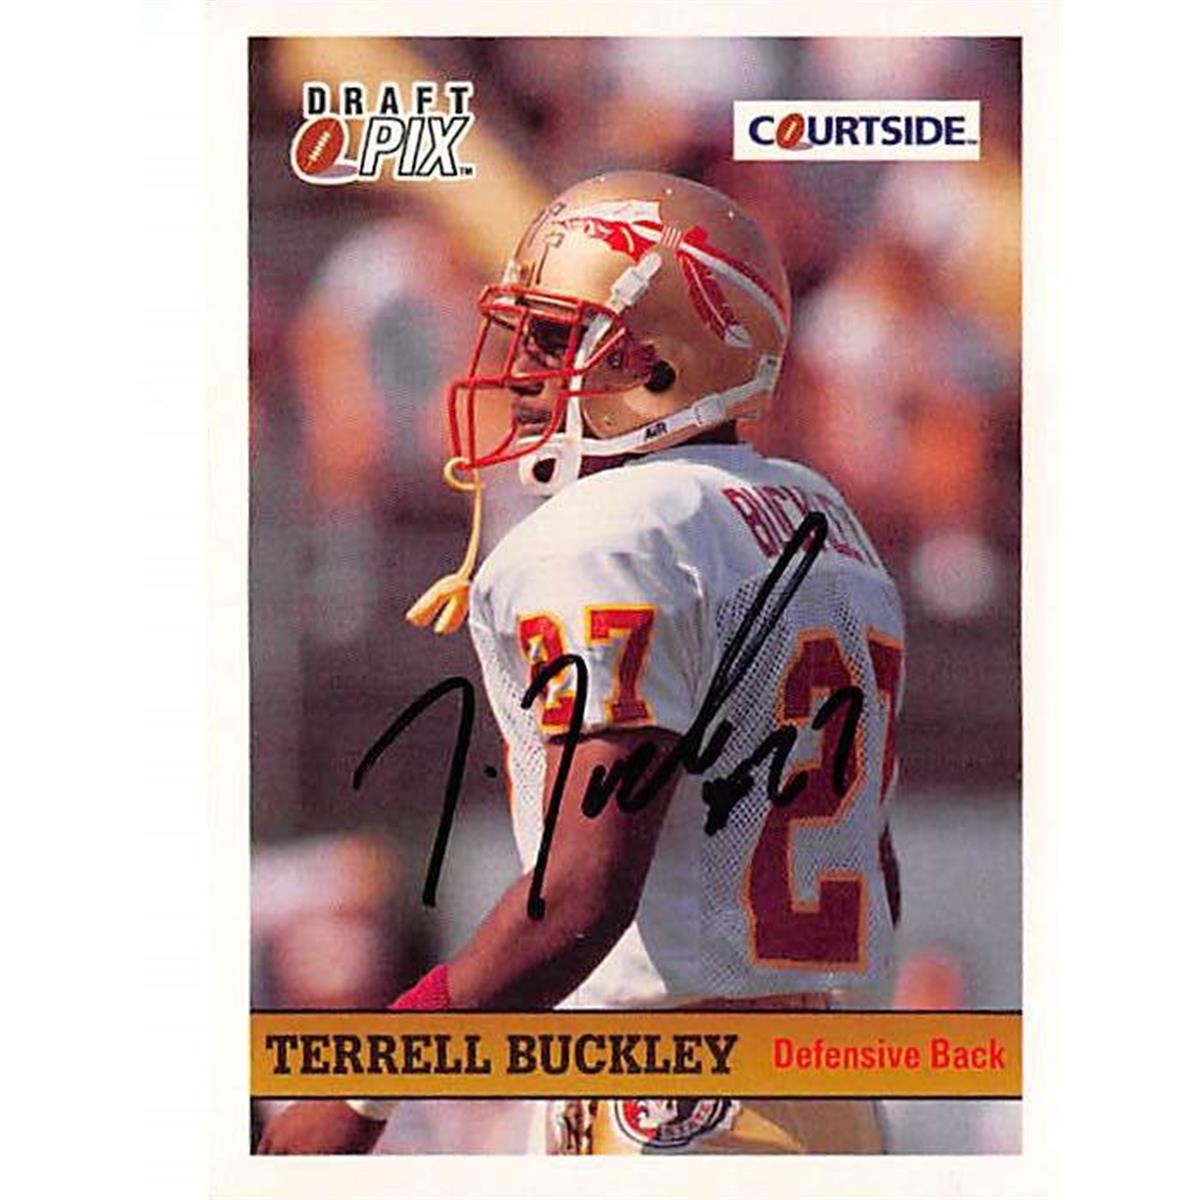 Picture of Autograph Warehouse 443904 Florida State Seminoles 1992 Courtside Draft Pix 100 Terrell Buckley Autographed Football Card